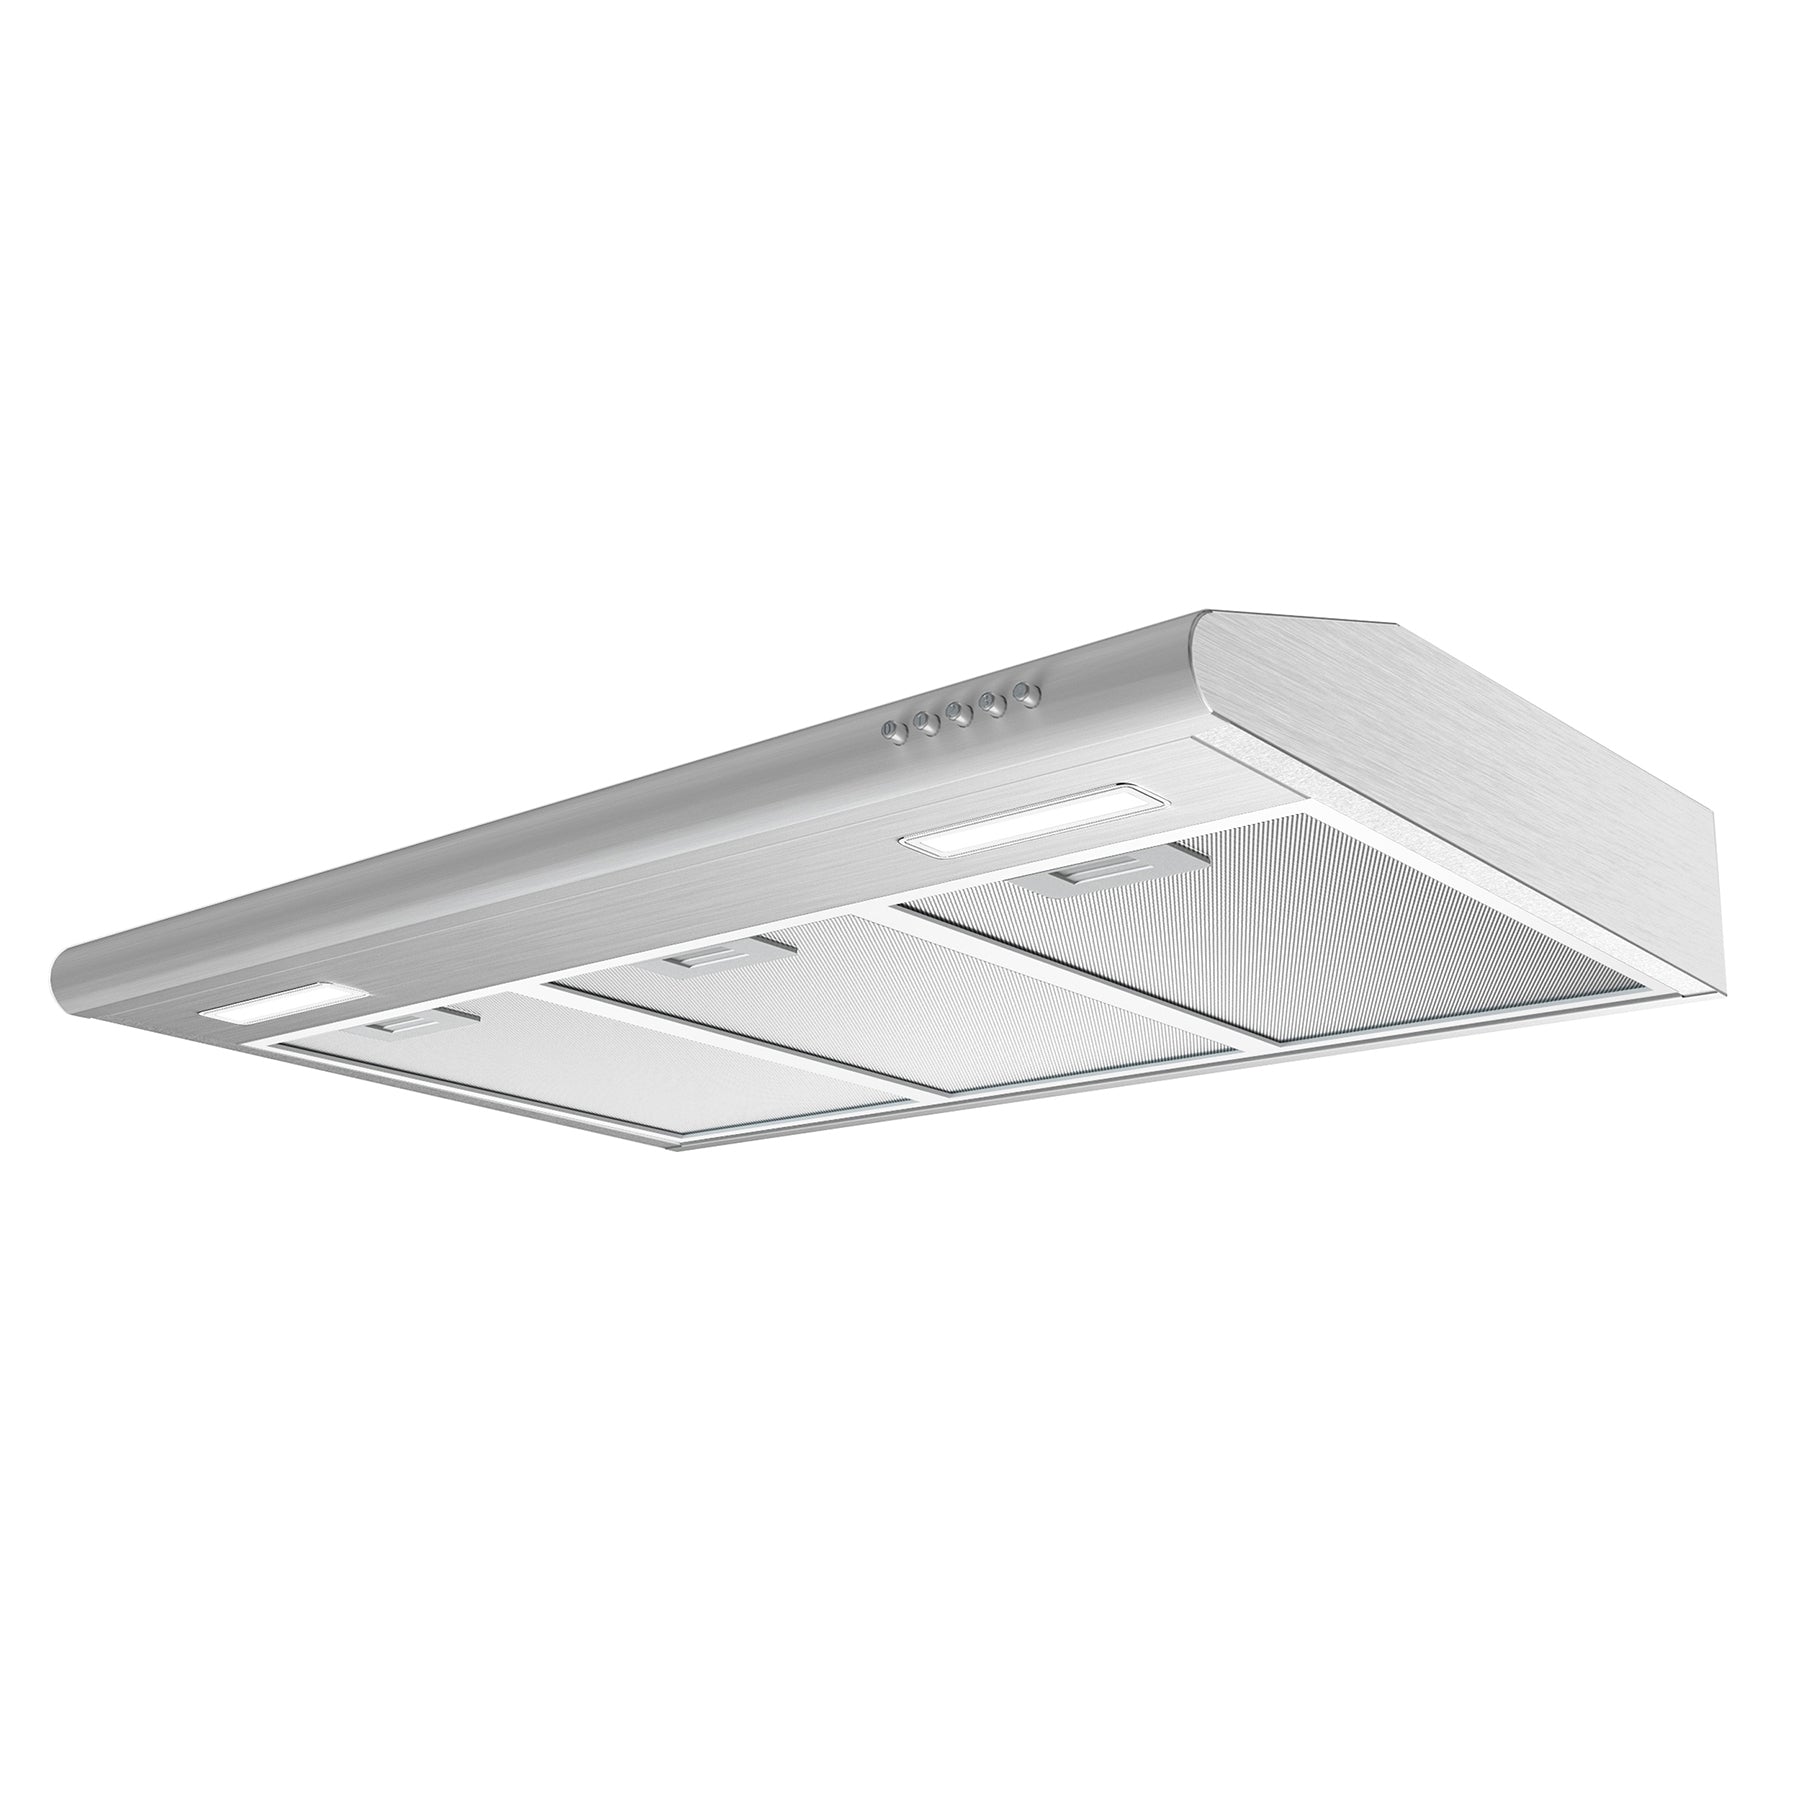 Ciarra 30 200 CFM Convertible Under Cabinet Range Hood in Stainless Steel Finish: Stainless Steel CAS75918A